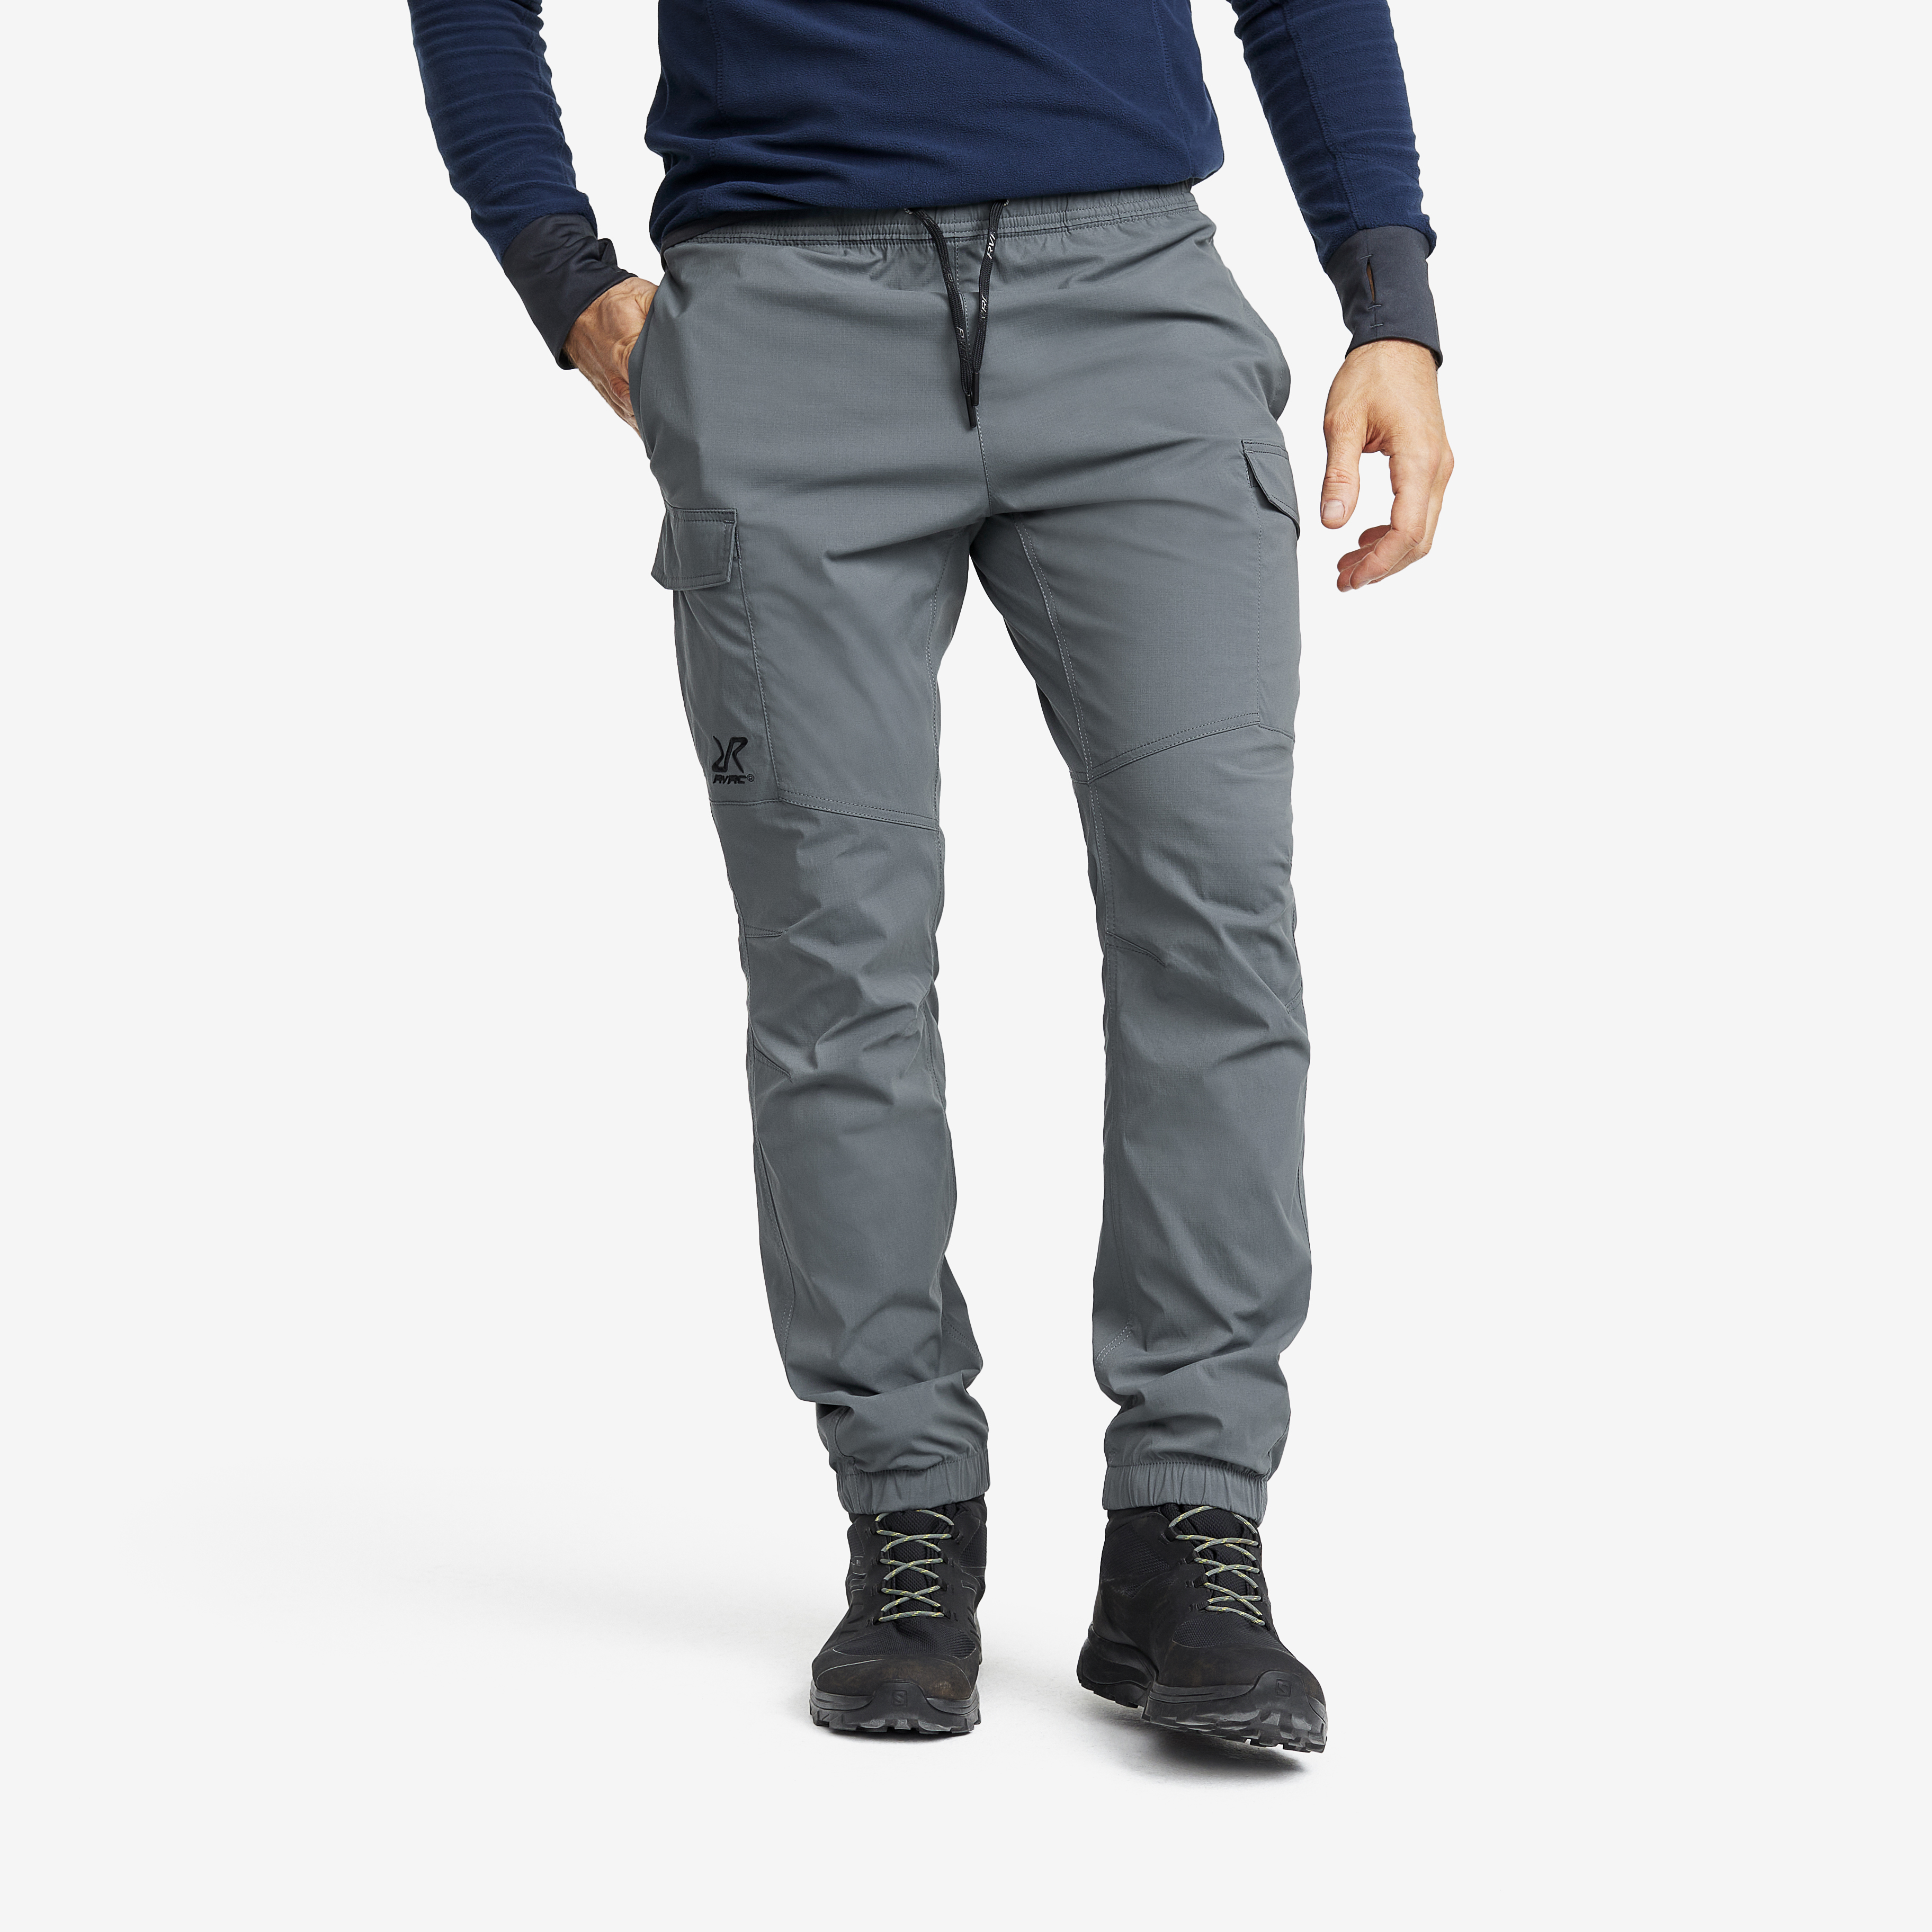 Men Cargo Jeans in Bangalore at best price by Ego Menswear - Justdial